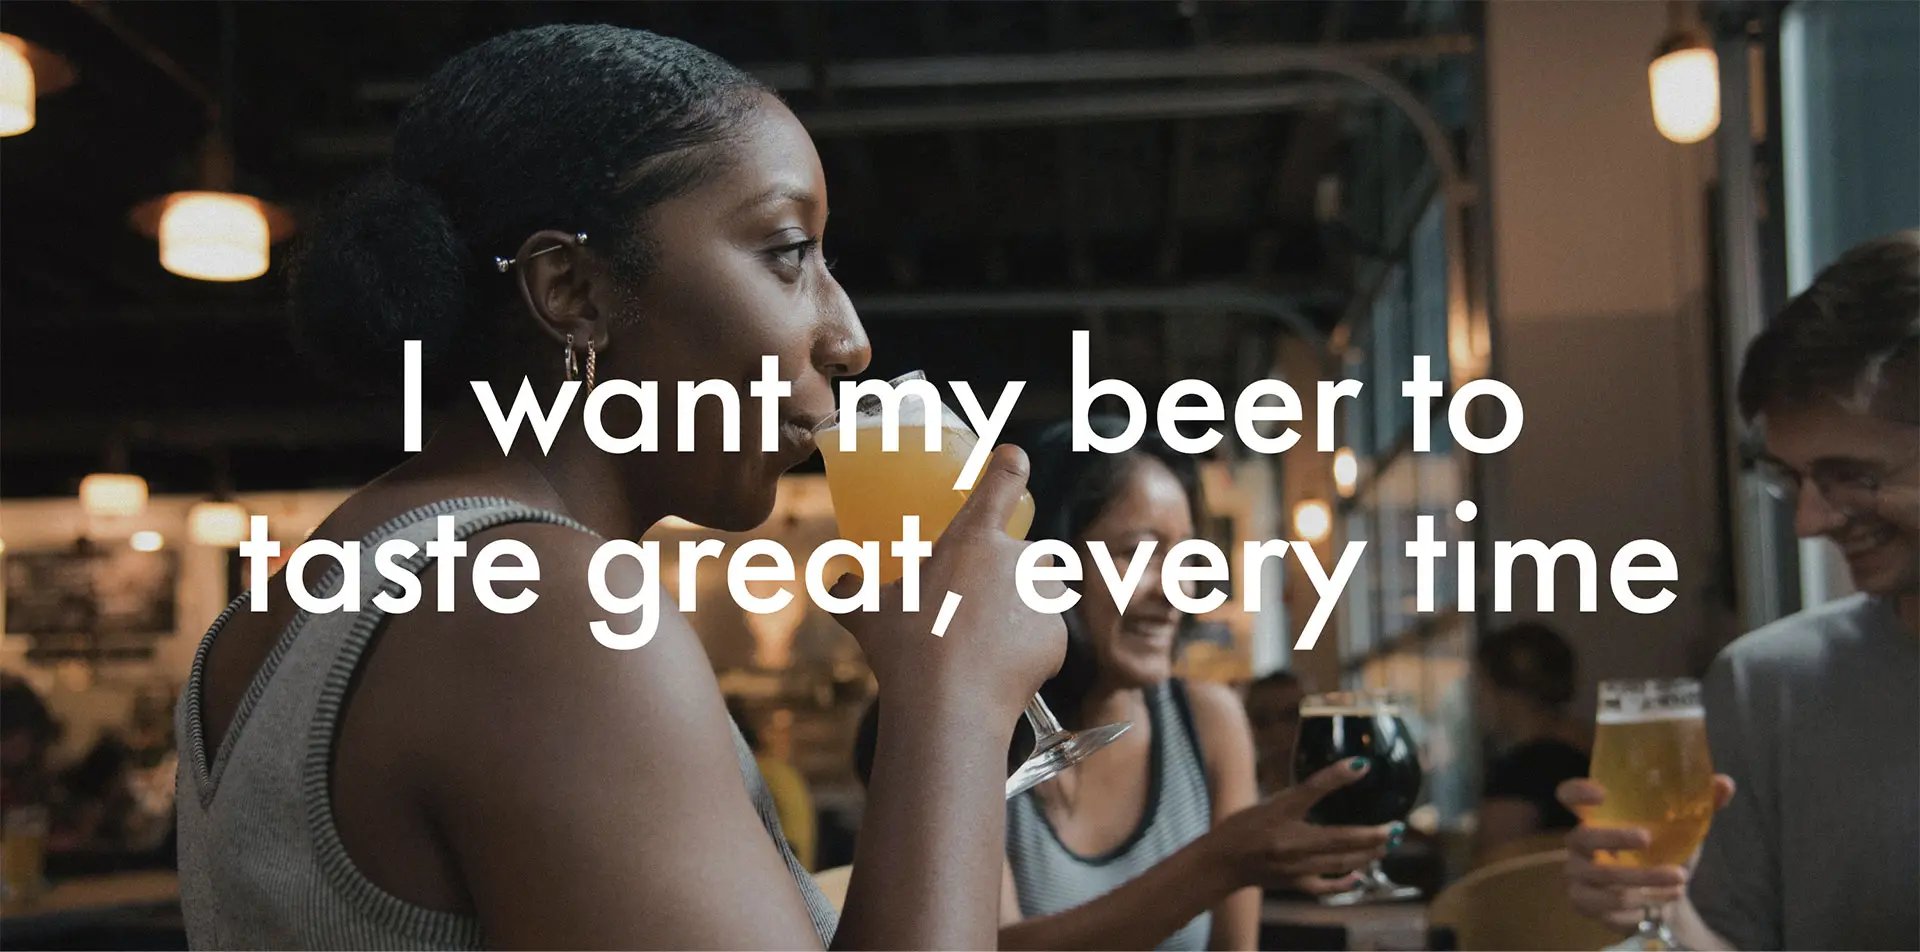 I want my beer to taste great, every time